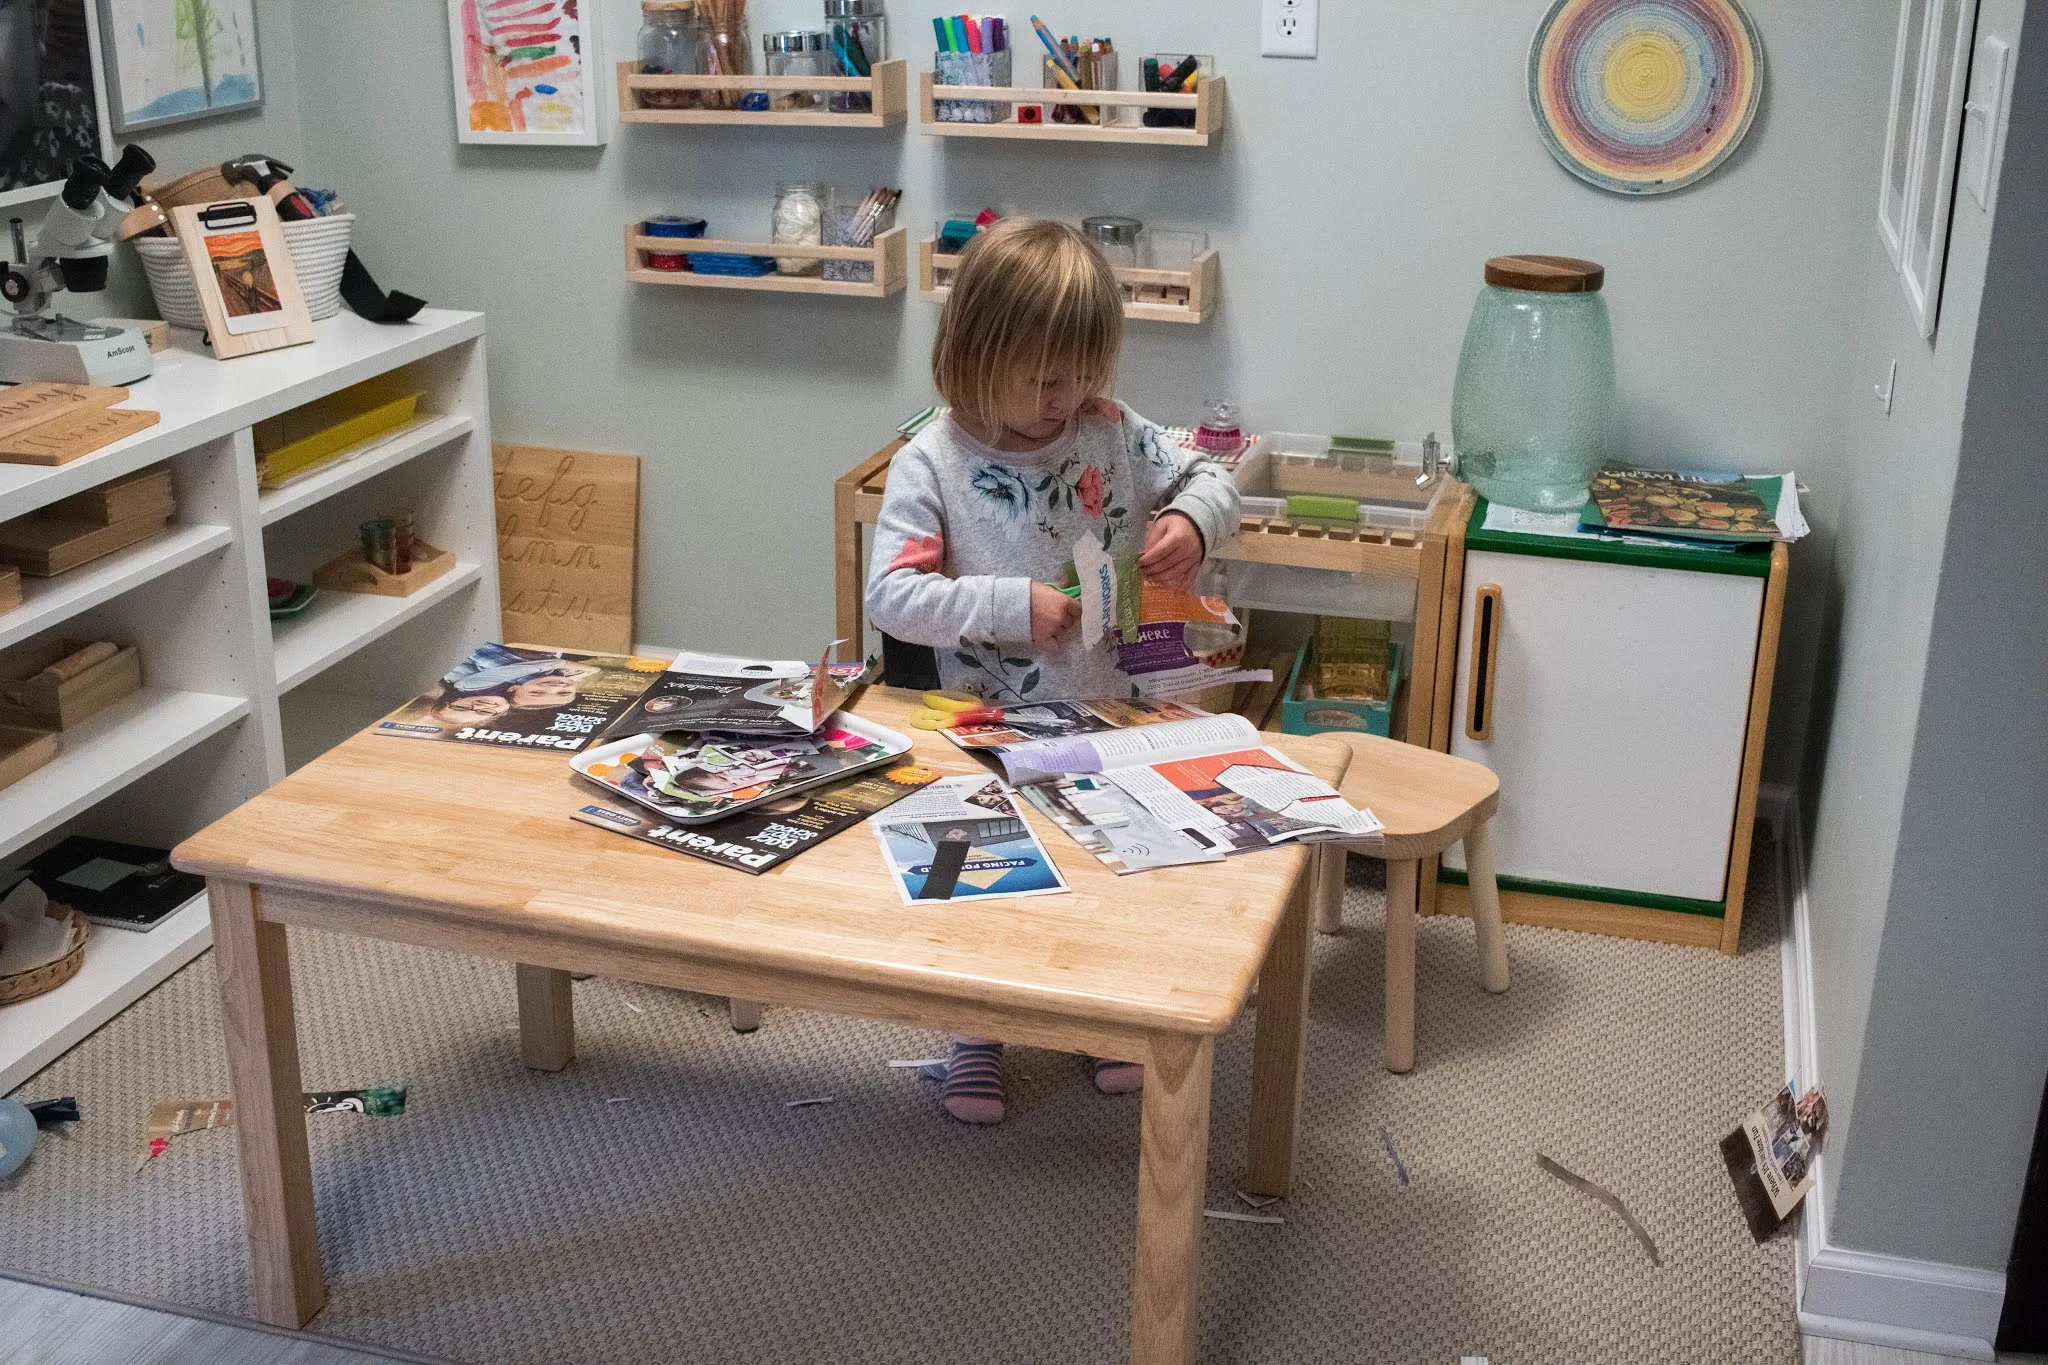 Magazine picture books to support fine motor skills and an early interest in writing - and easy DIY for your Montessori shelves.